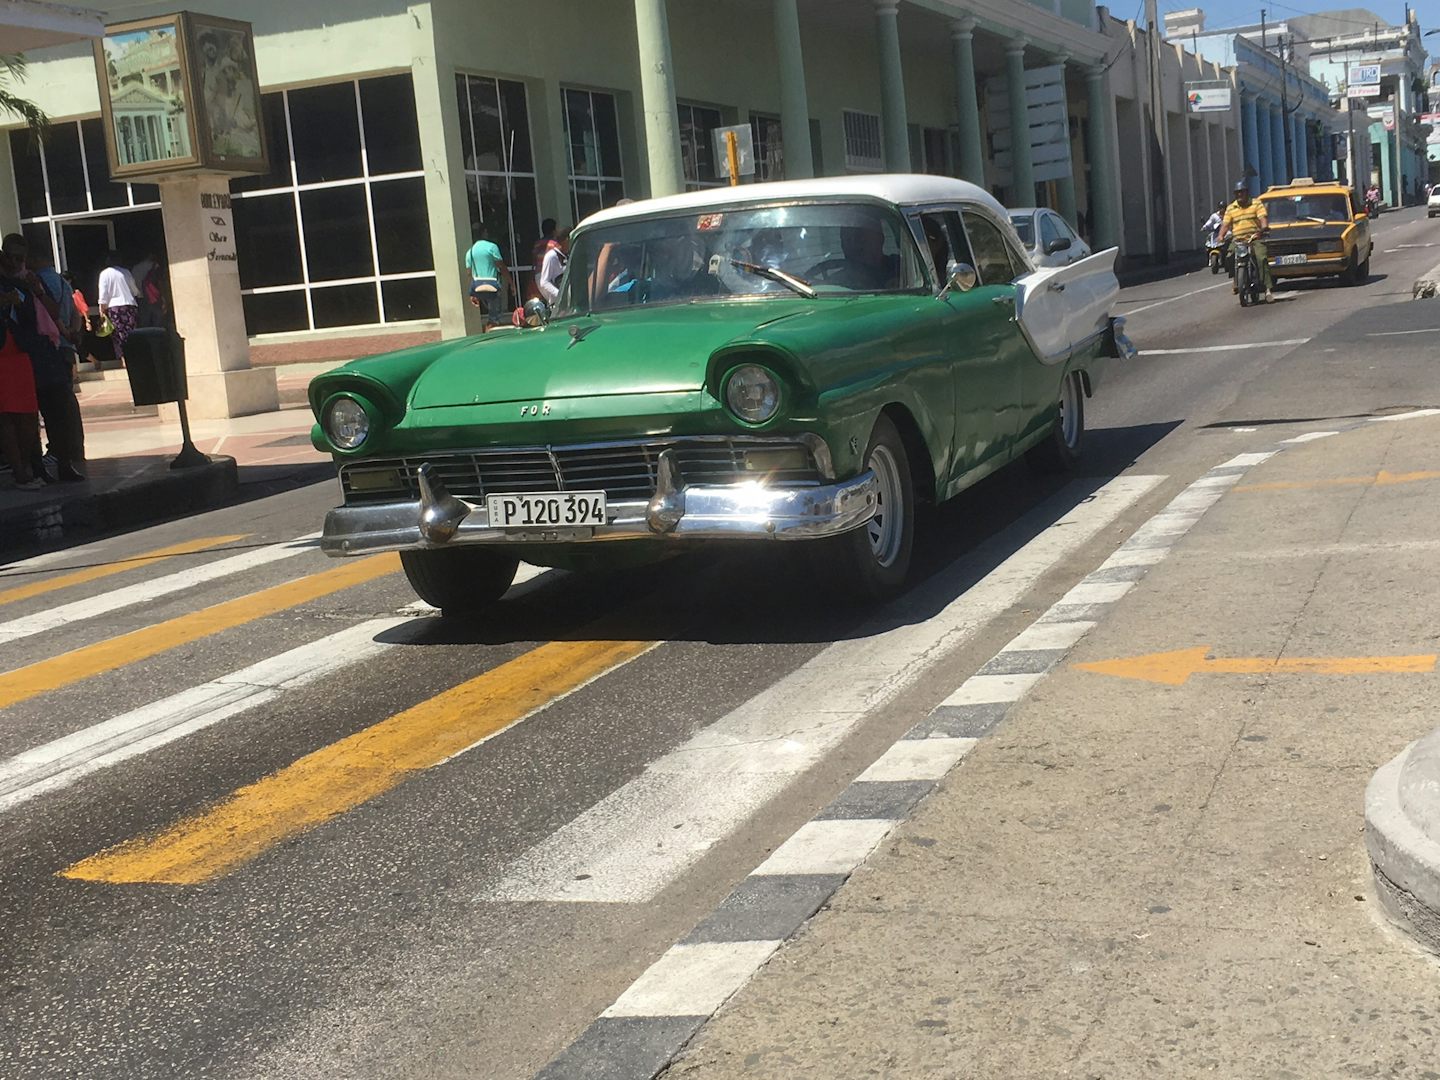 Lots of old cars in Cuba!